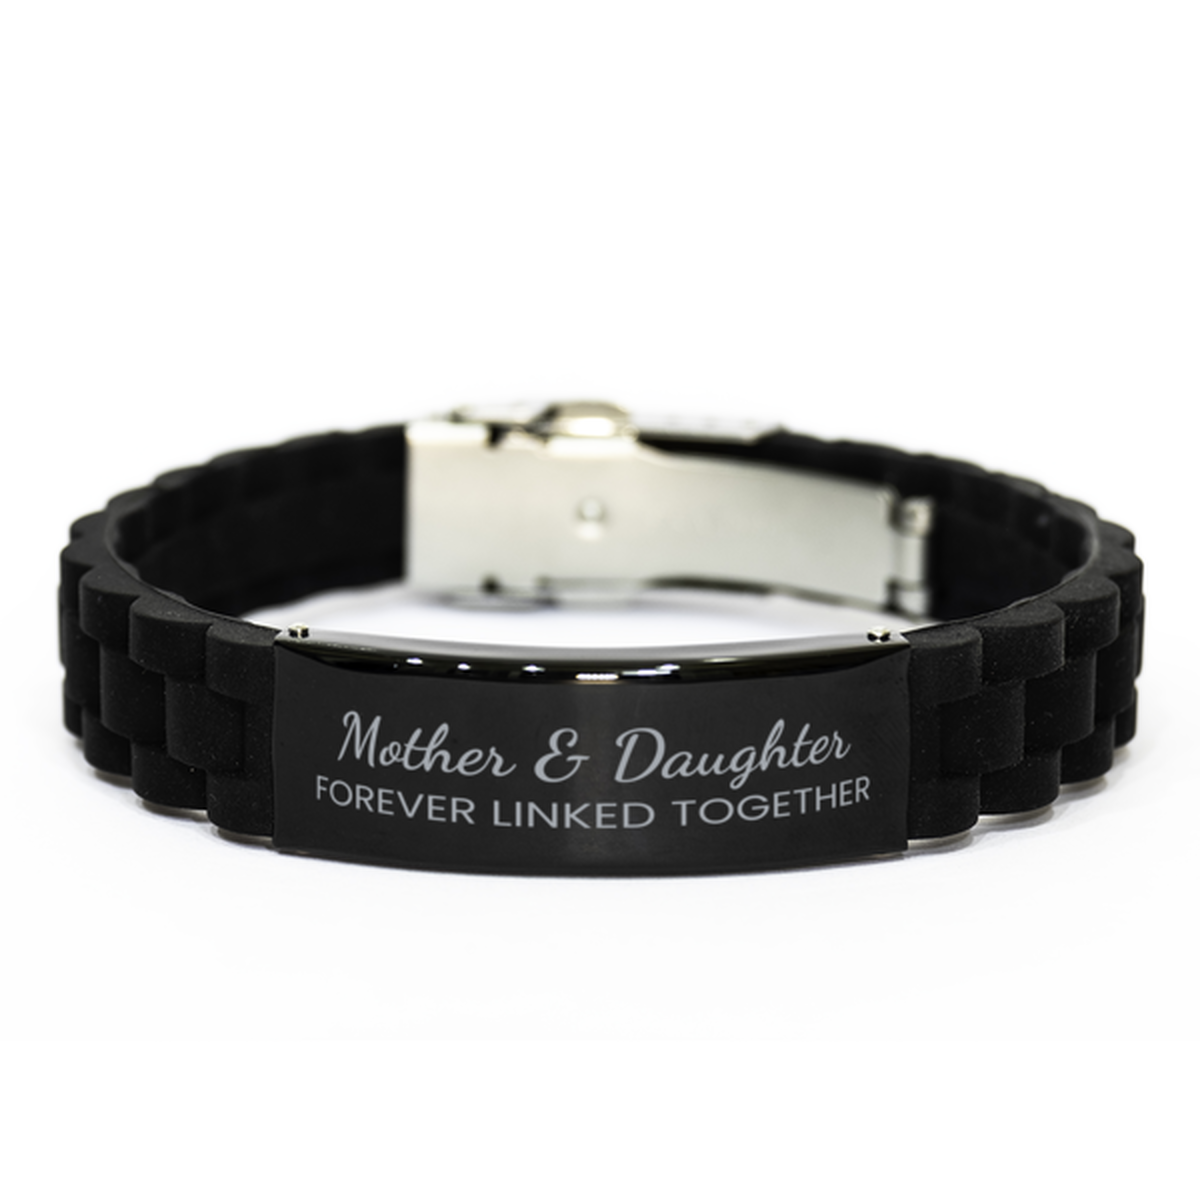 Mother and Daughter Forever Linked Together Bracelet, Mother Daughter Bracelet, Black Stainless Steel Silicone Bracelet, Birthday, Christmas.